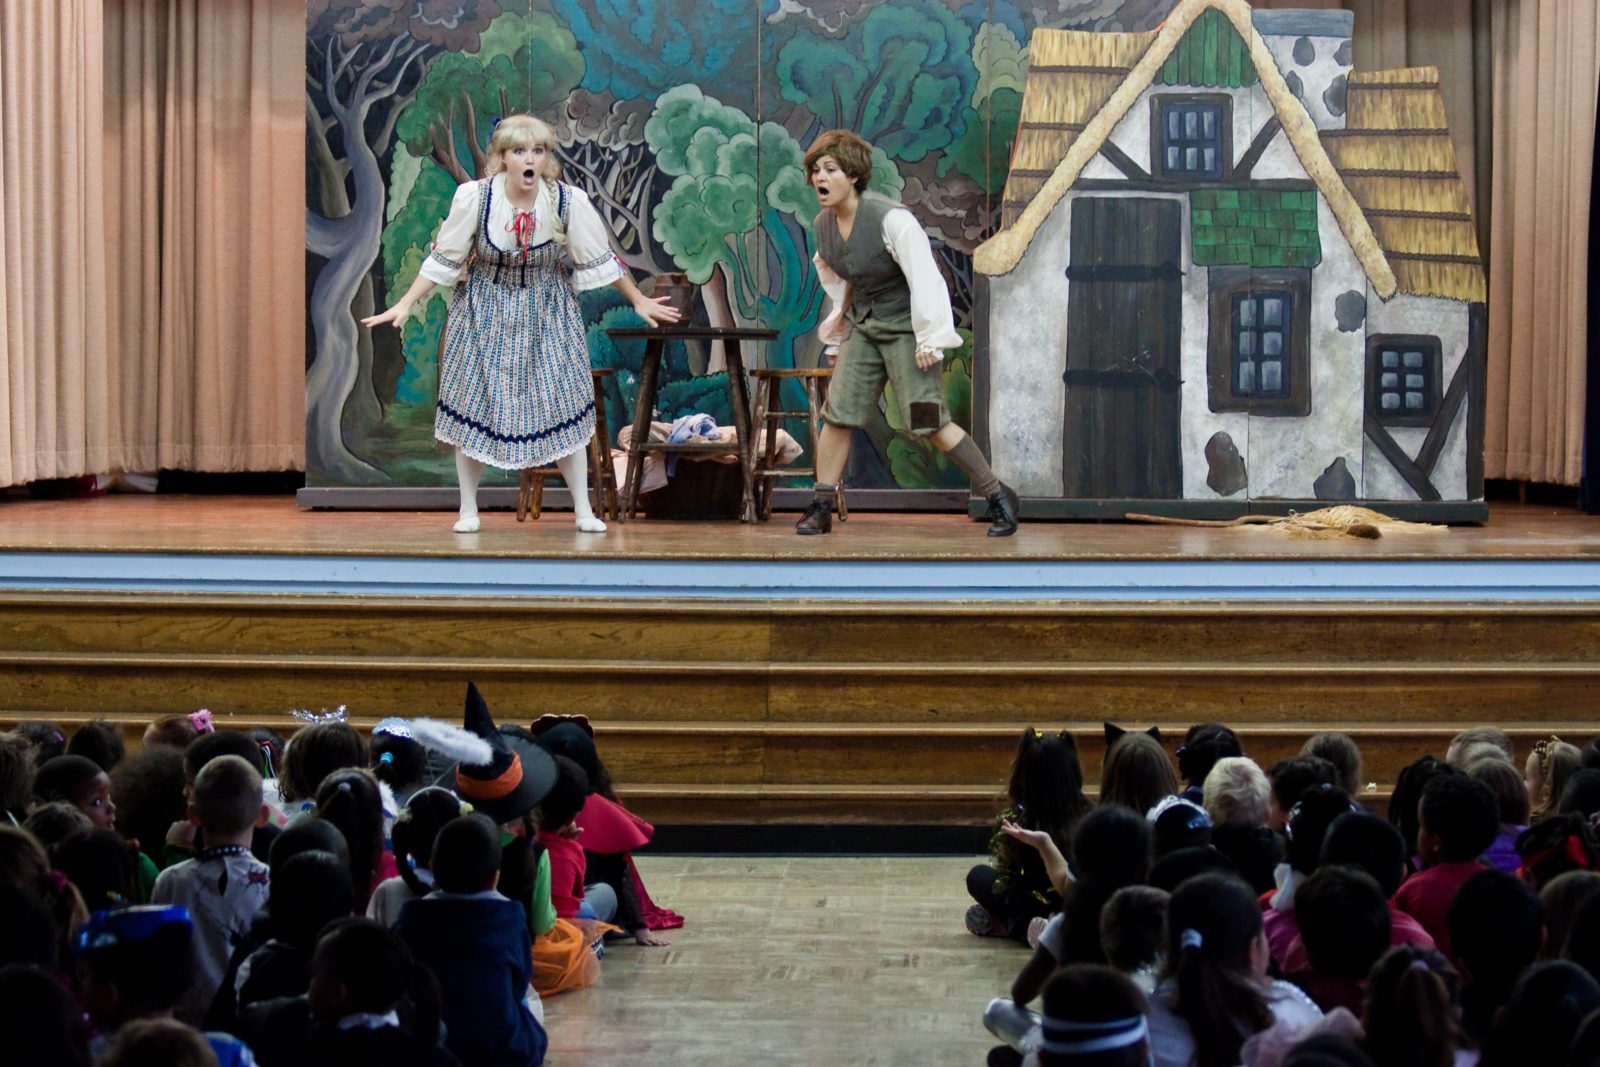 Classic Children’s Opera Hansel And Gretel To Be Performed At Library – The Katy News1600 x 1067